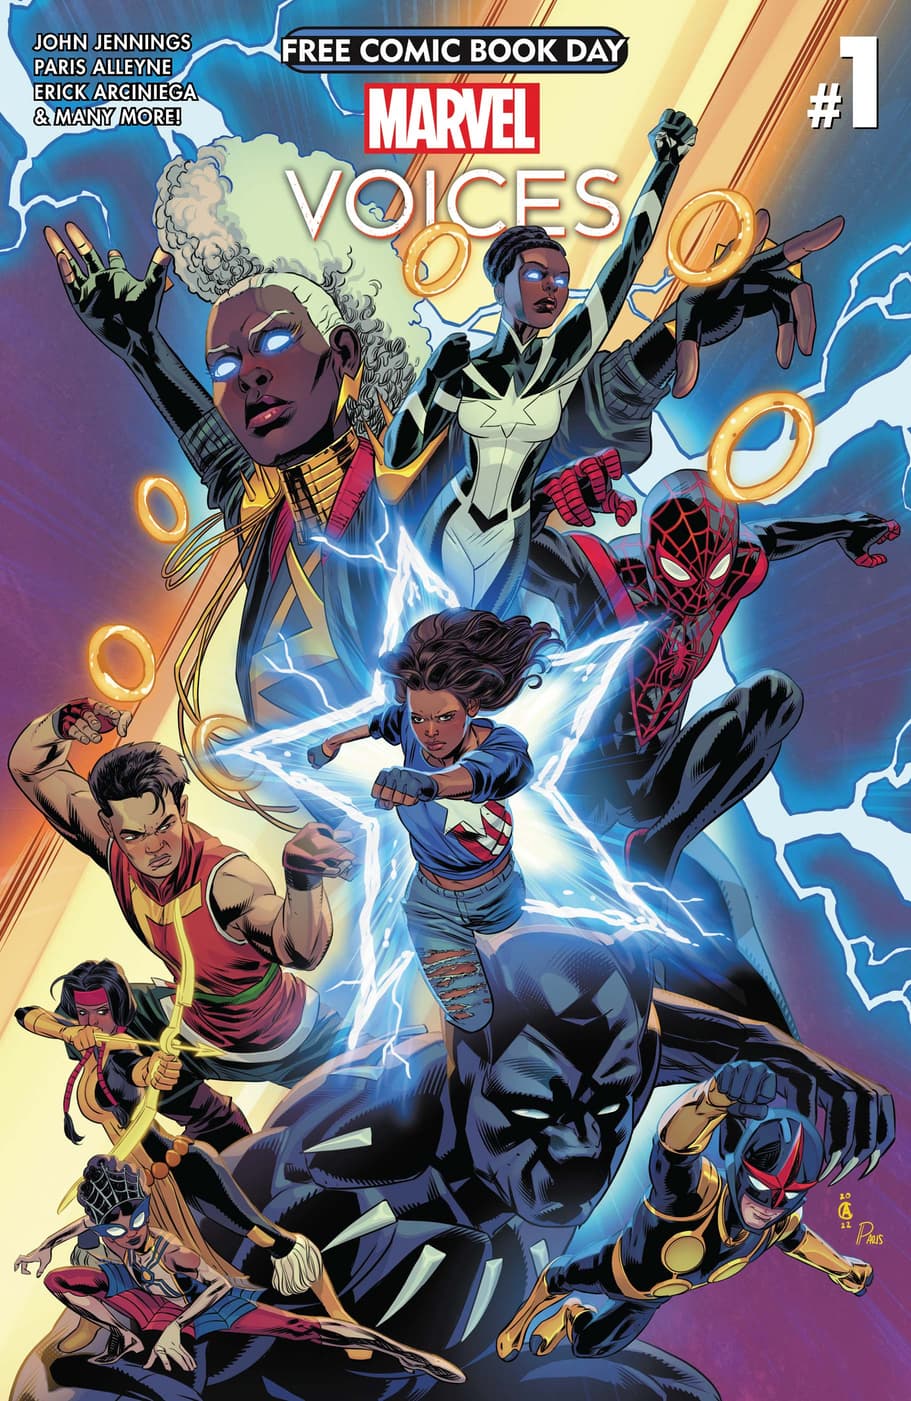 FREE COMIC BOOK DAY 2023: MARVEL’S VOICES #1 cover by Chris Allen and Paris Alleyne